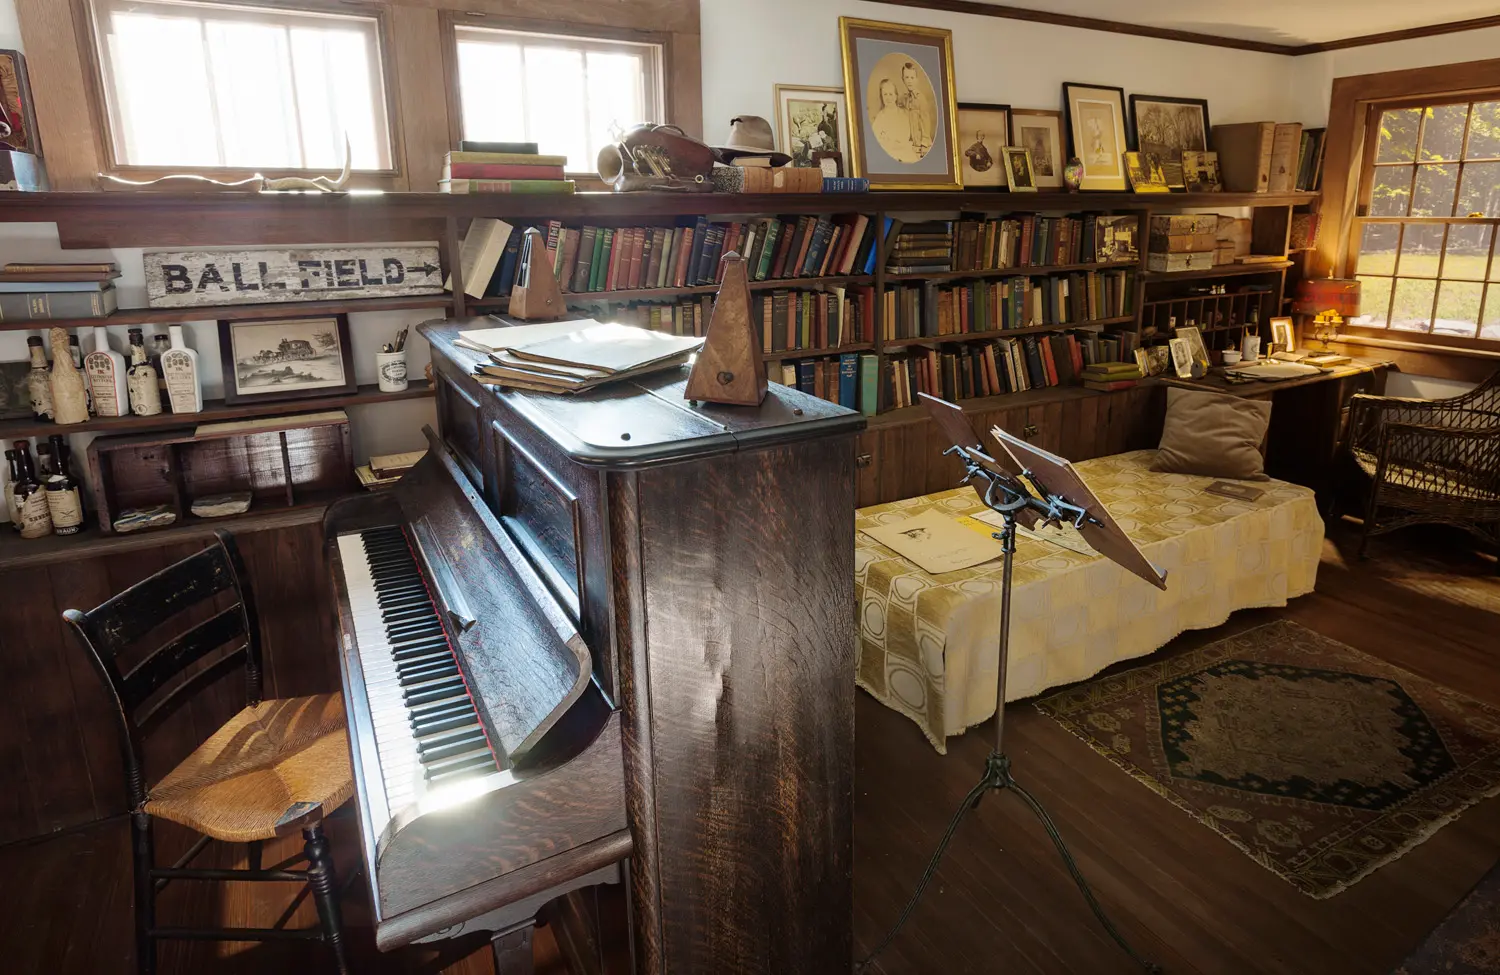 An angled view of a long room shows a piano and chair, a small bed and rug, framed portraits, a bookshelf, and miscellaneous items.